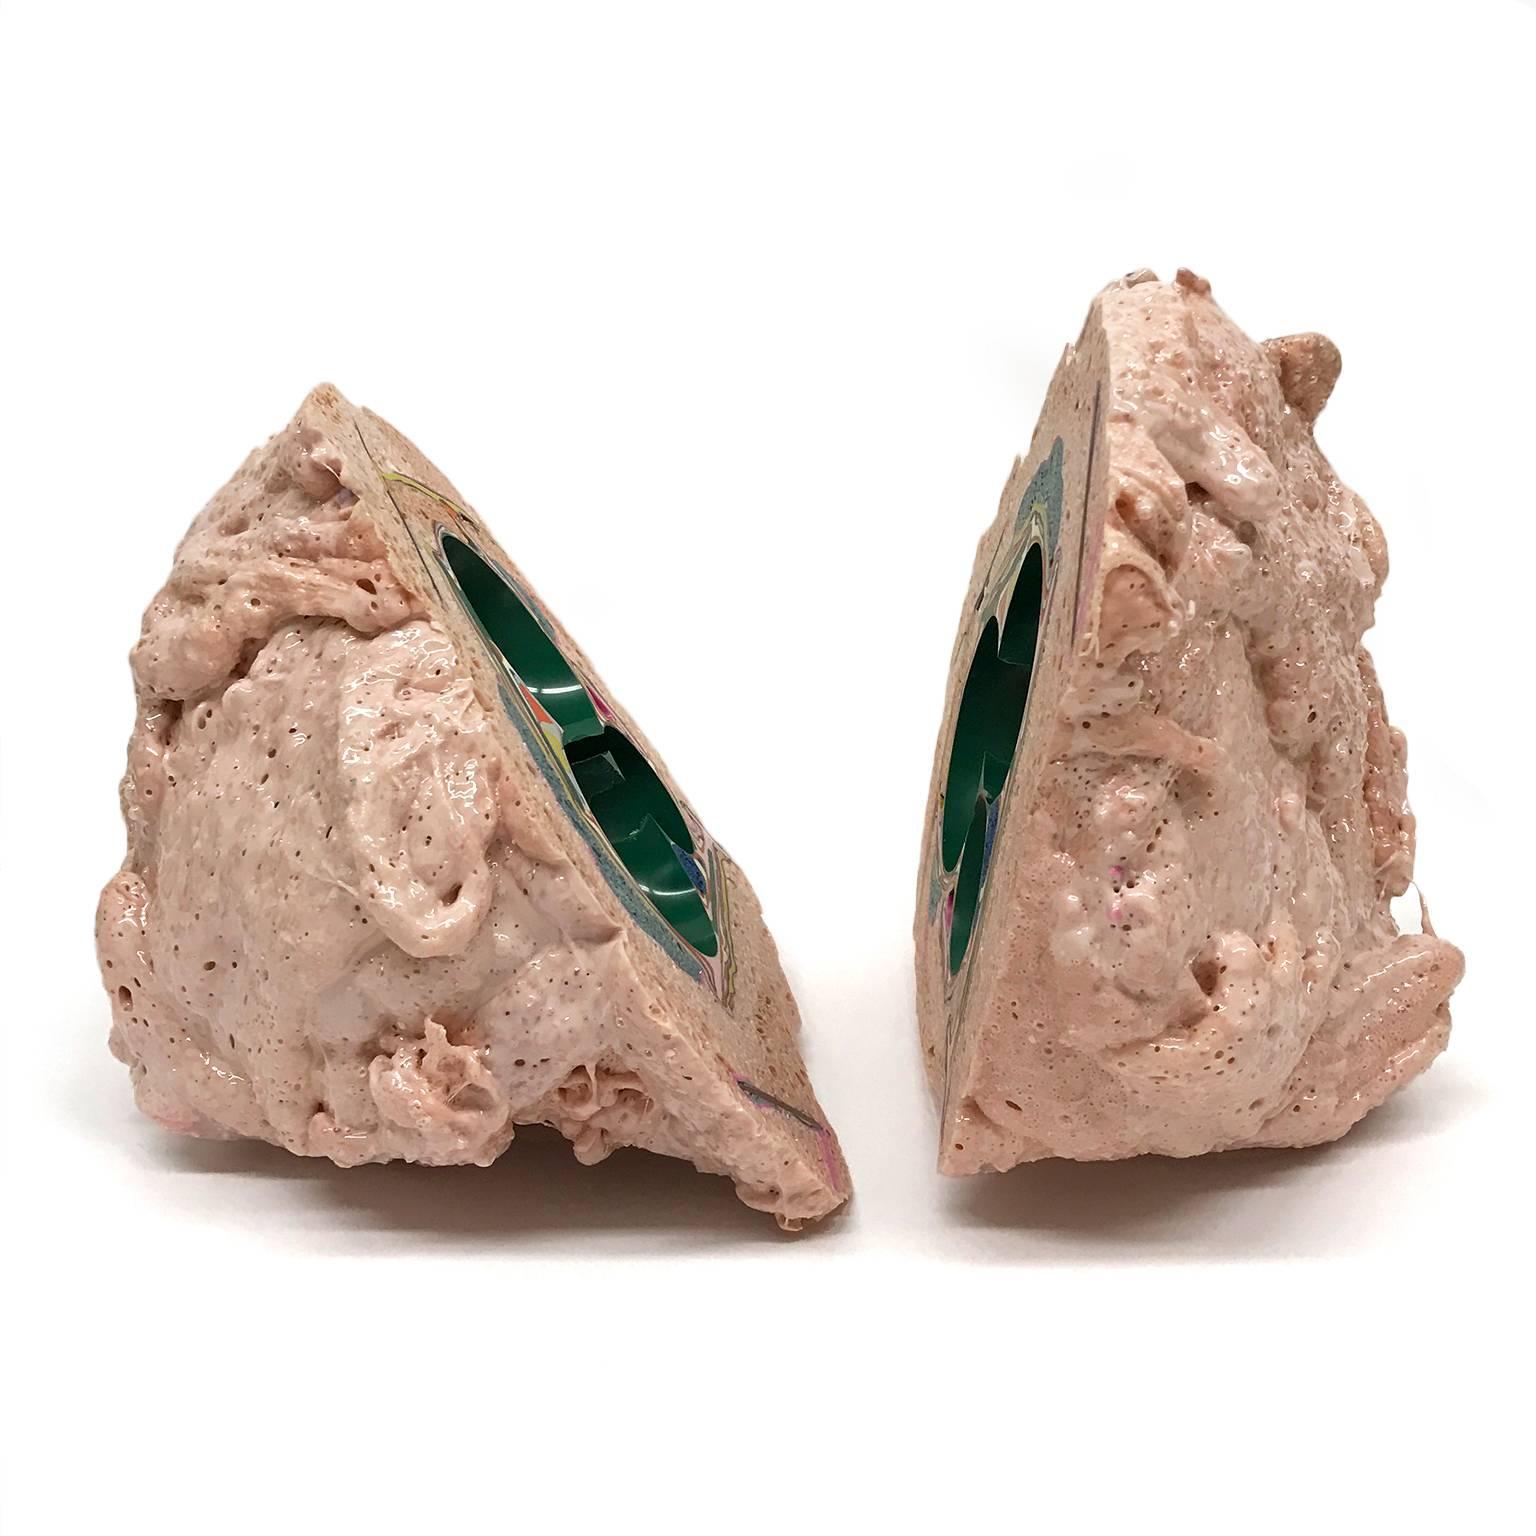 Organic Modern Unique Handmade Tabletop Geode Sculpture in Emerald Green and Blush Pink For Sale